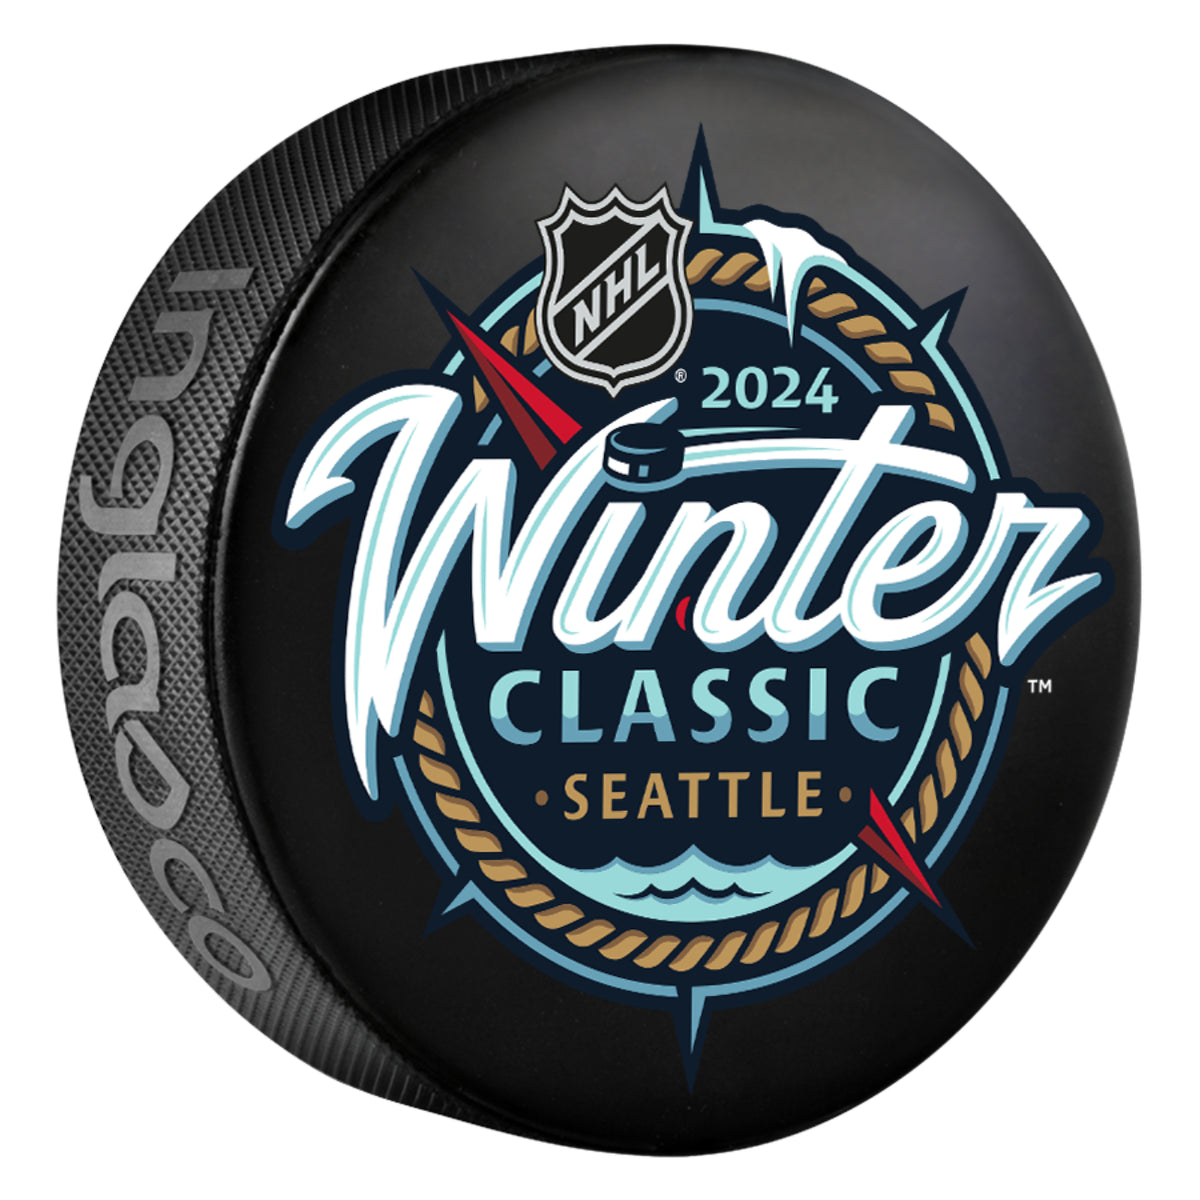  Outerstuff Youth Kids NHL Winter Classic Team Logo